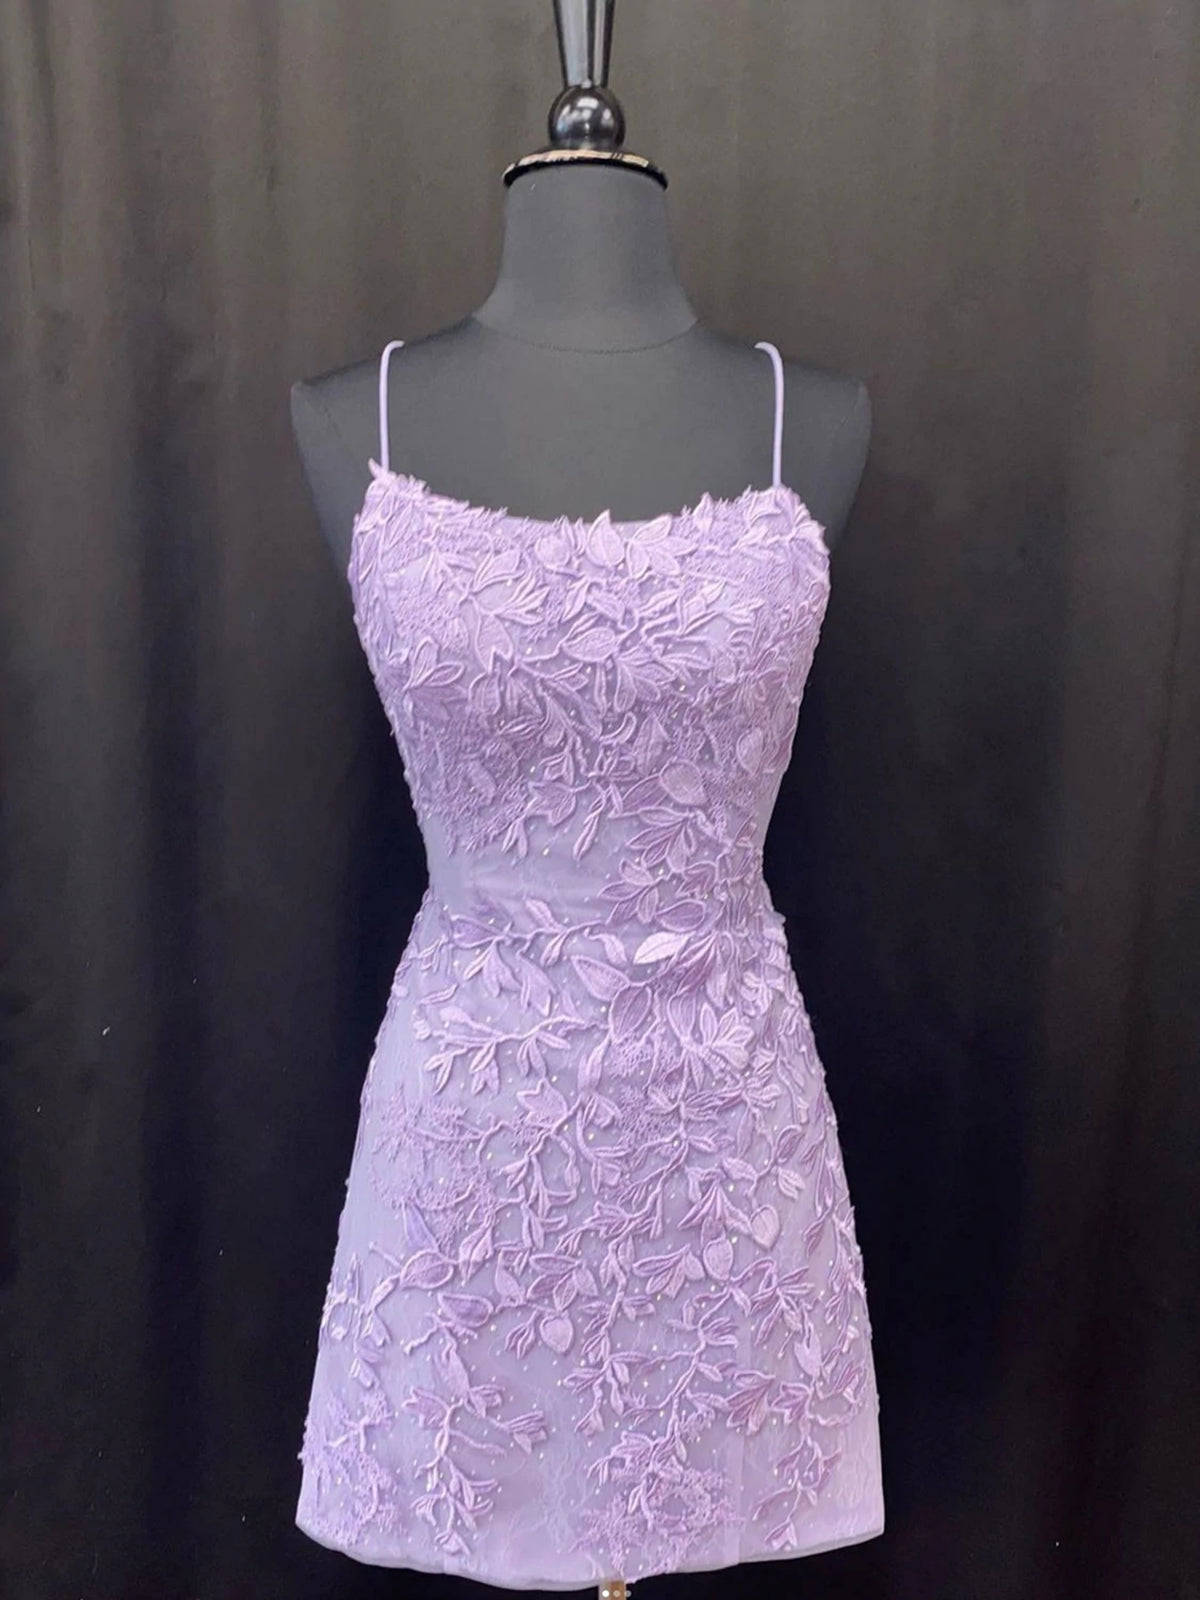 Homecoming Dresses Tight, Lavender Lace Short Homecoming Dresses,Backless Hoco Dress